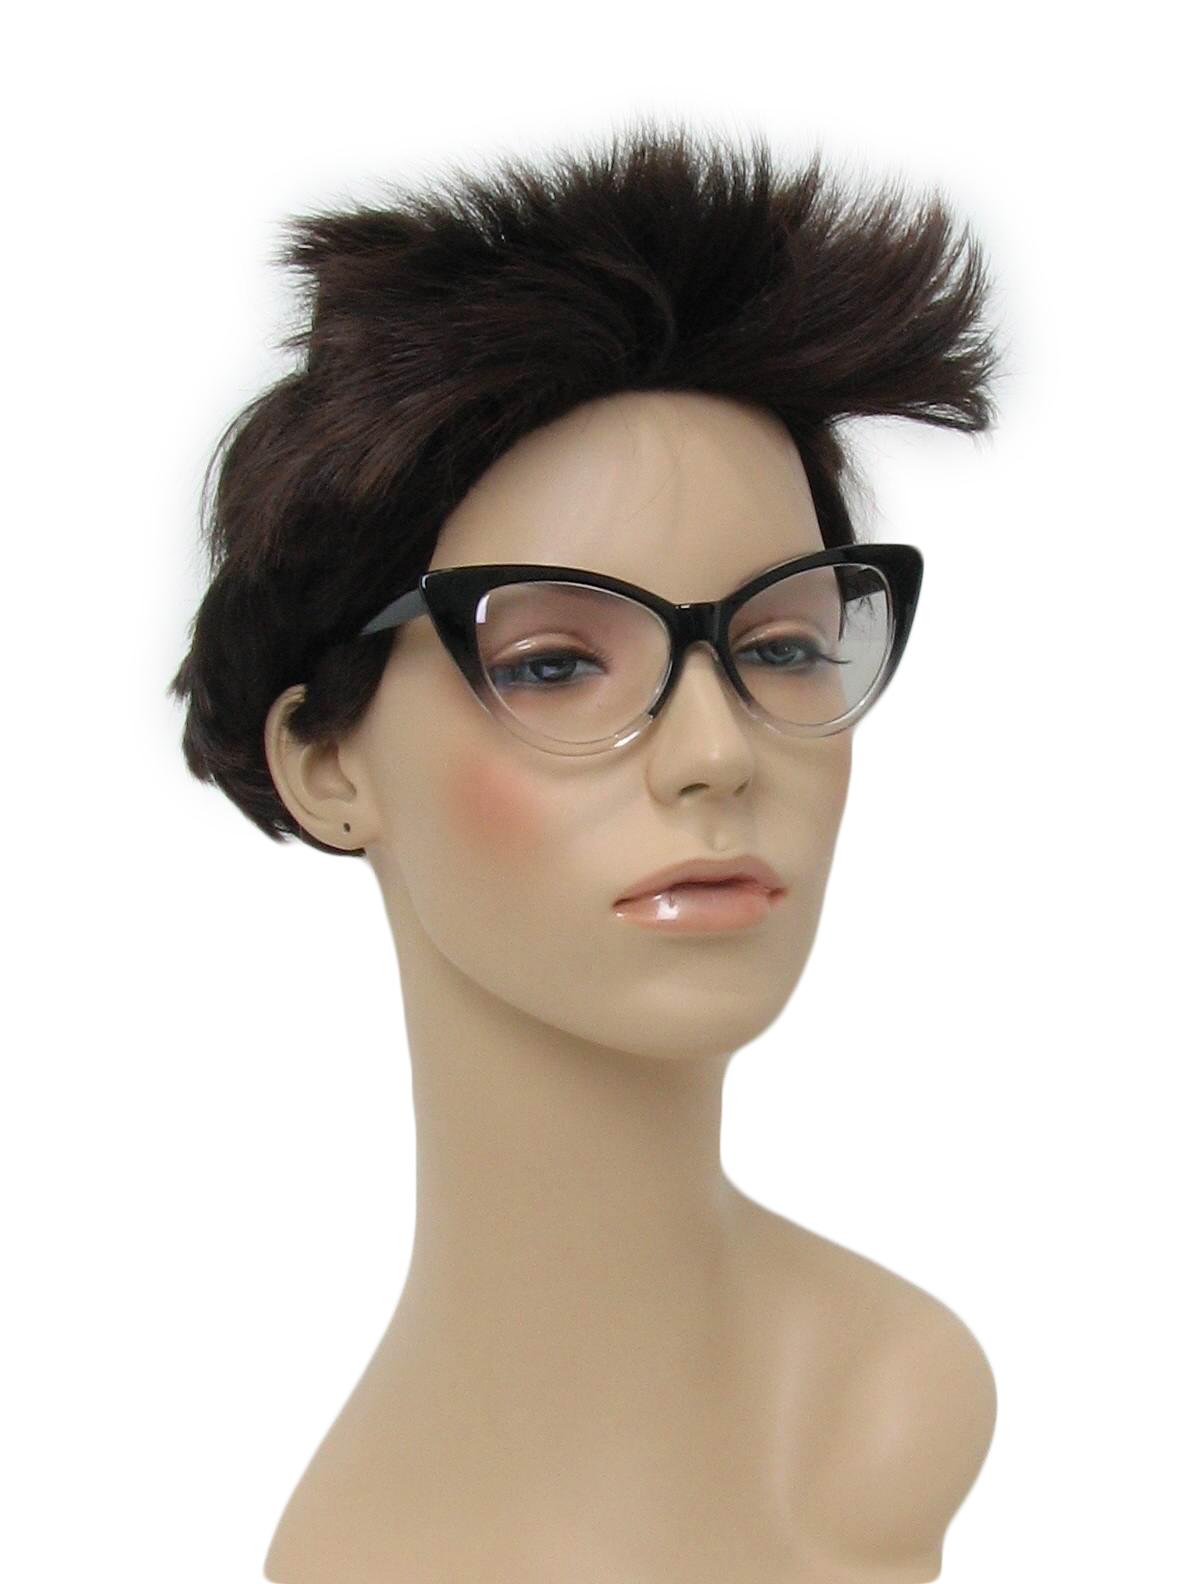 1950's Retro Glasses: 50s Style (made recently) -No Label- Womens black ...